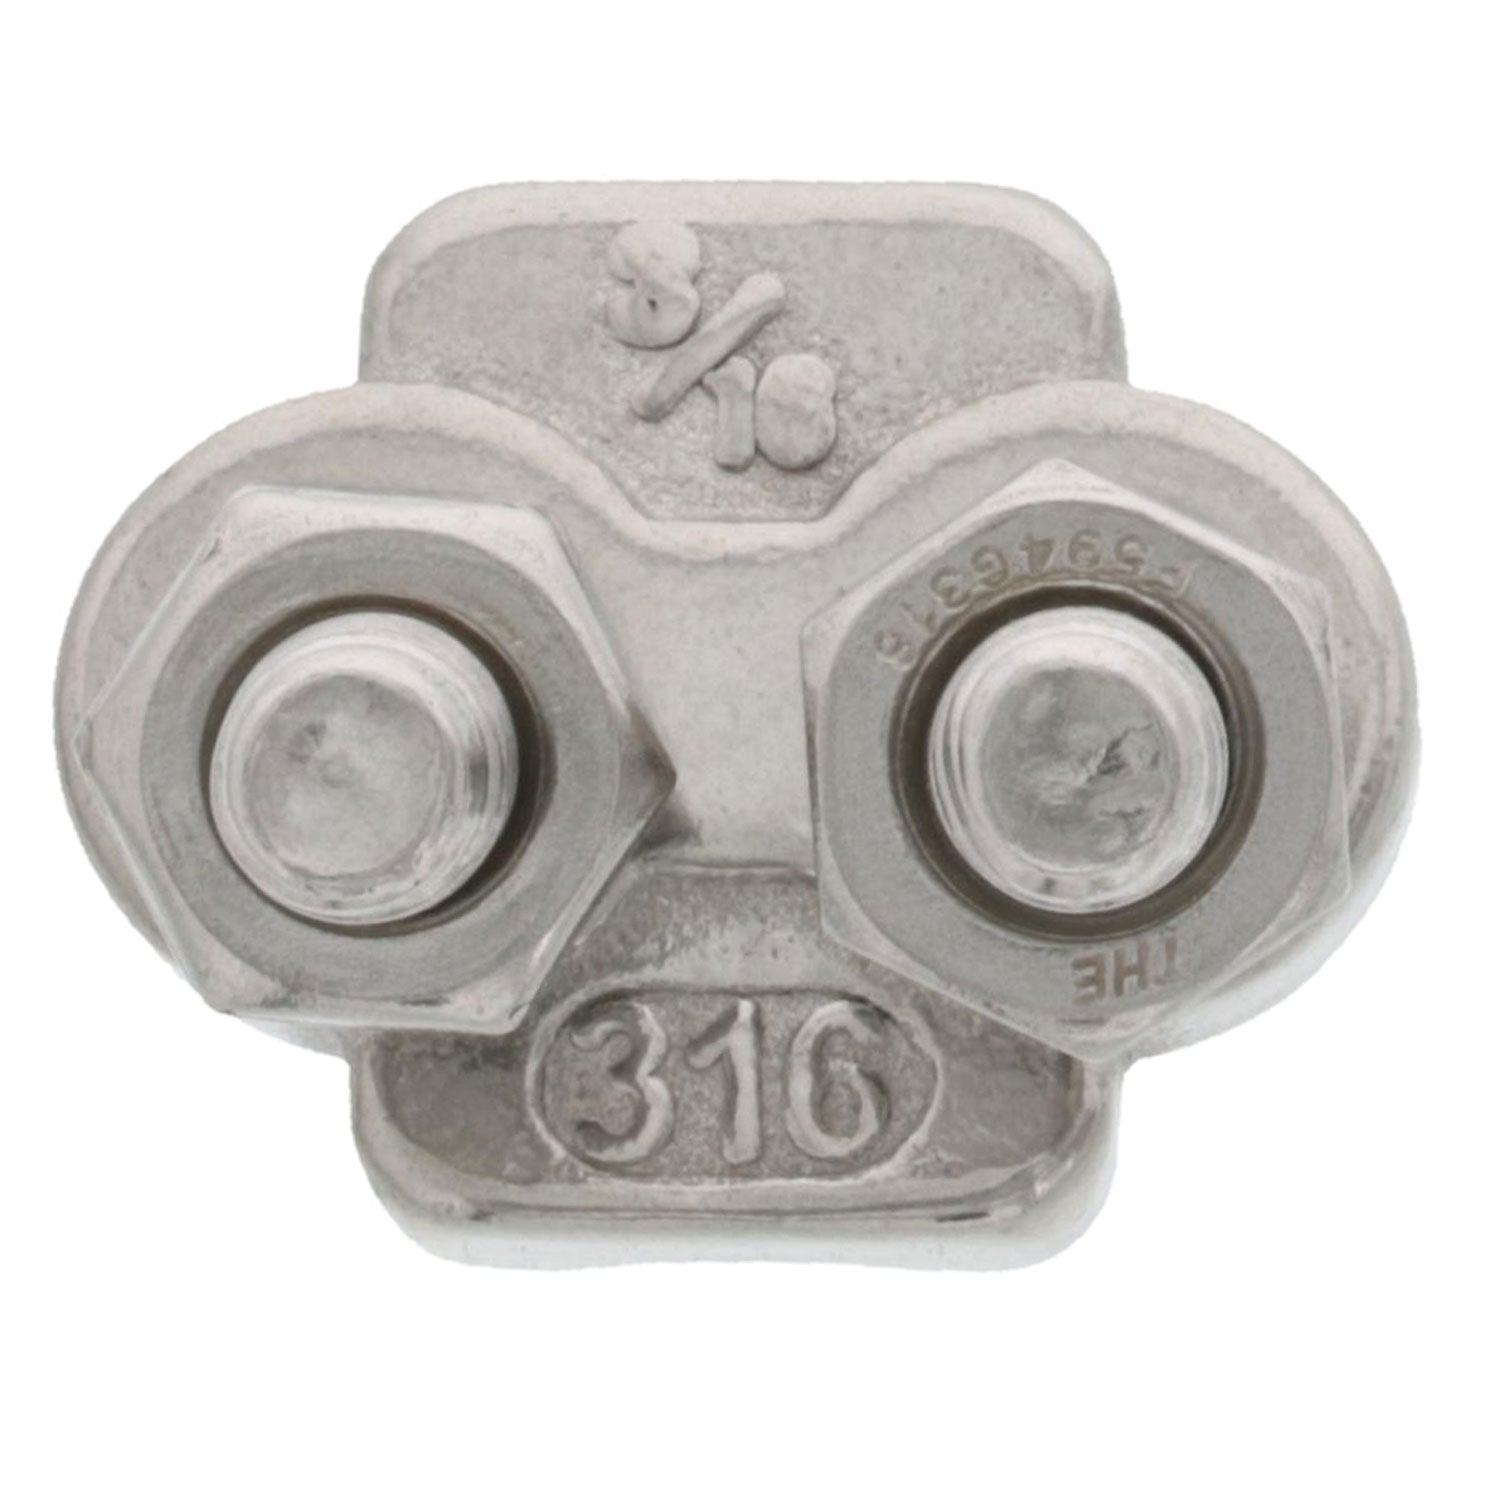 Type 316 Stainless Steel Cast Wire Rope Clip